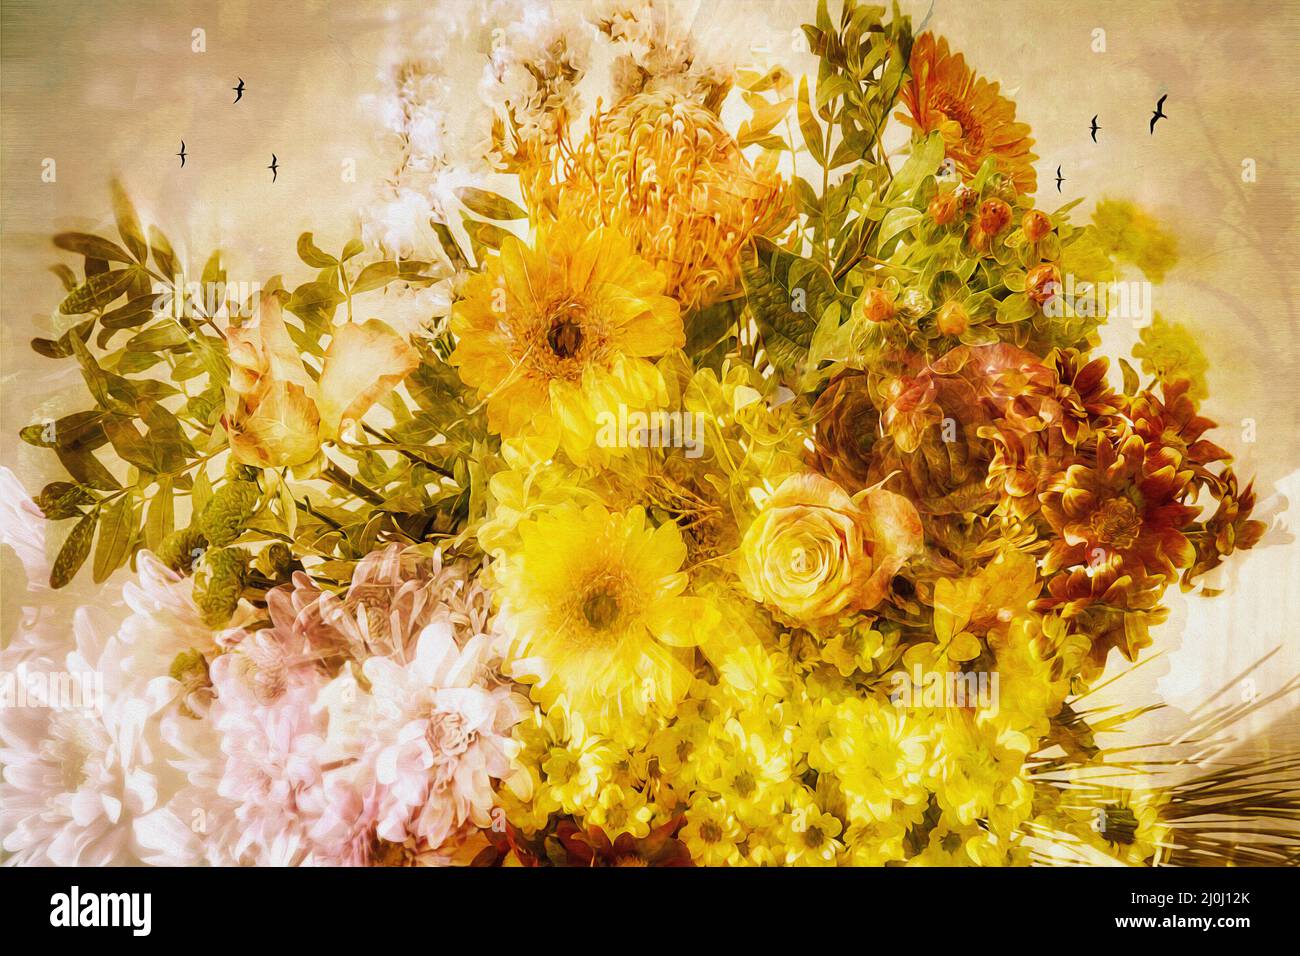 FLORAL ART: Bunch of Autumn Flowers  (HDR-Image) Stock Photo